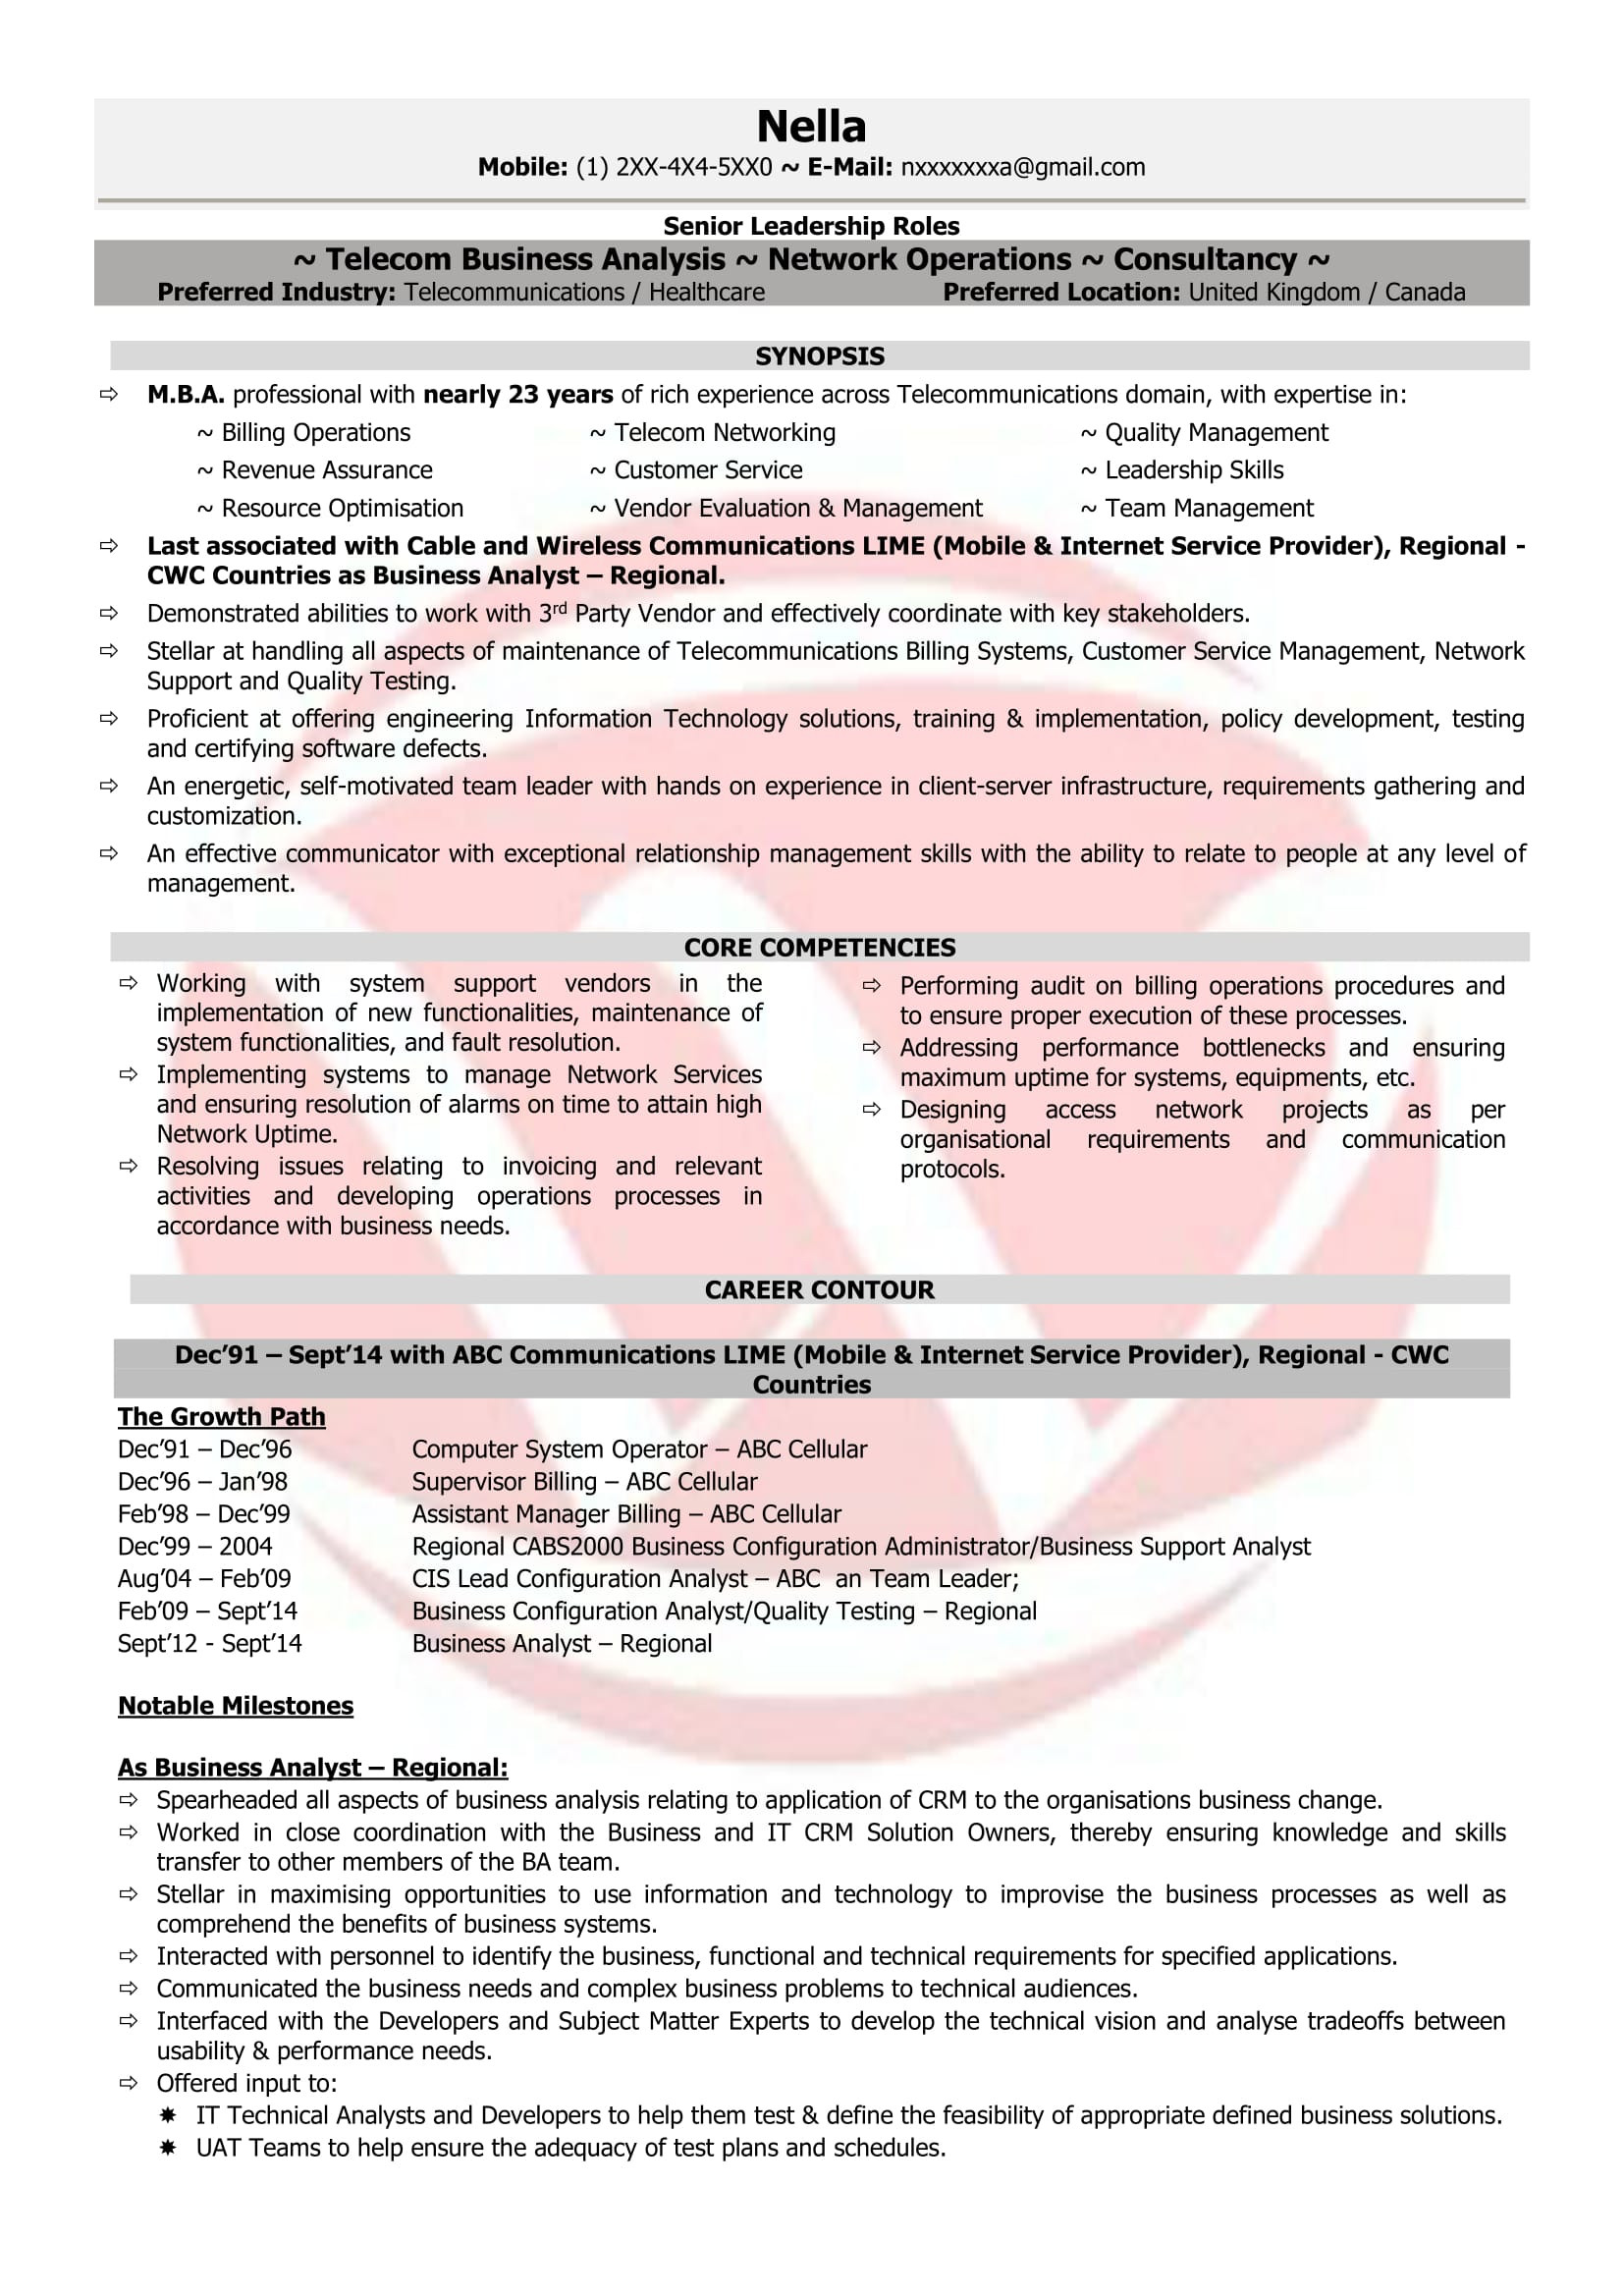 Sample Resume for A Sale Manager Telecomunication Telecom Manager Sample Resumes, Download Resume format Templates!